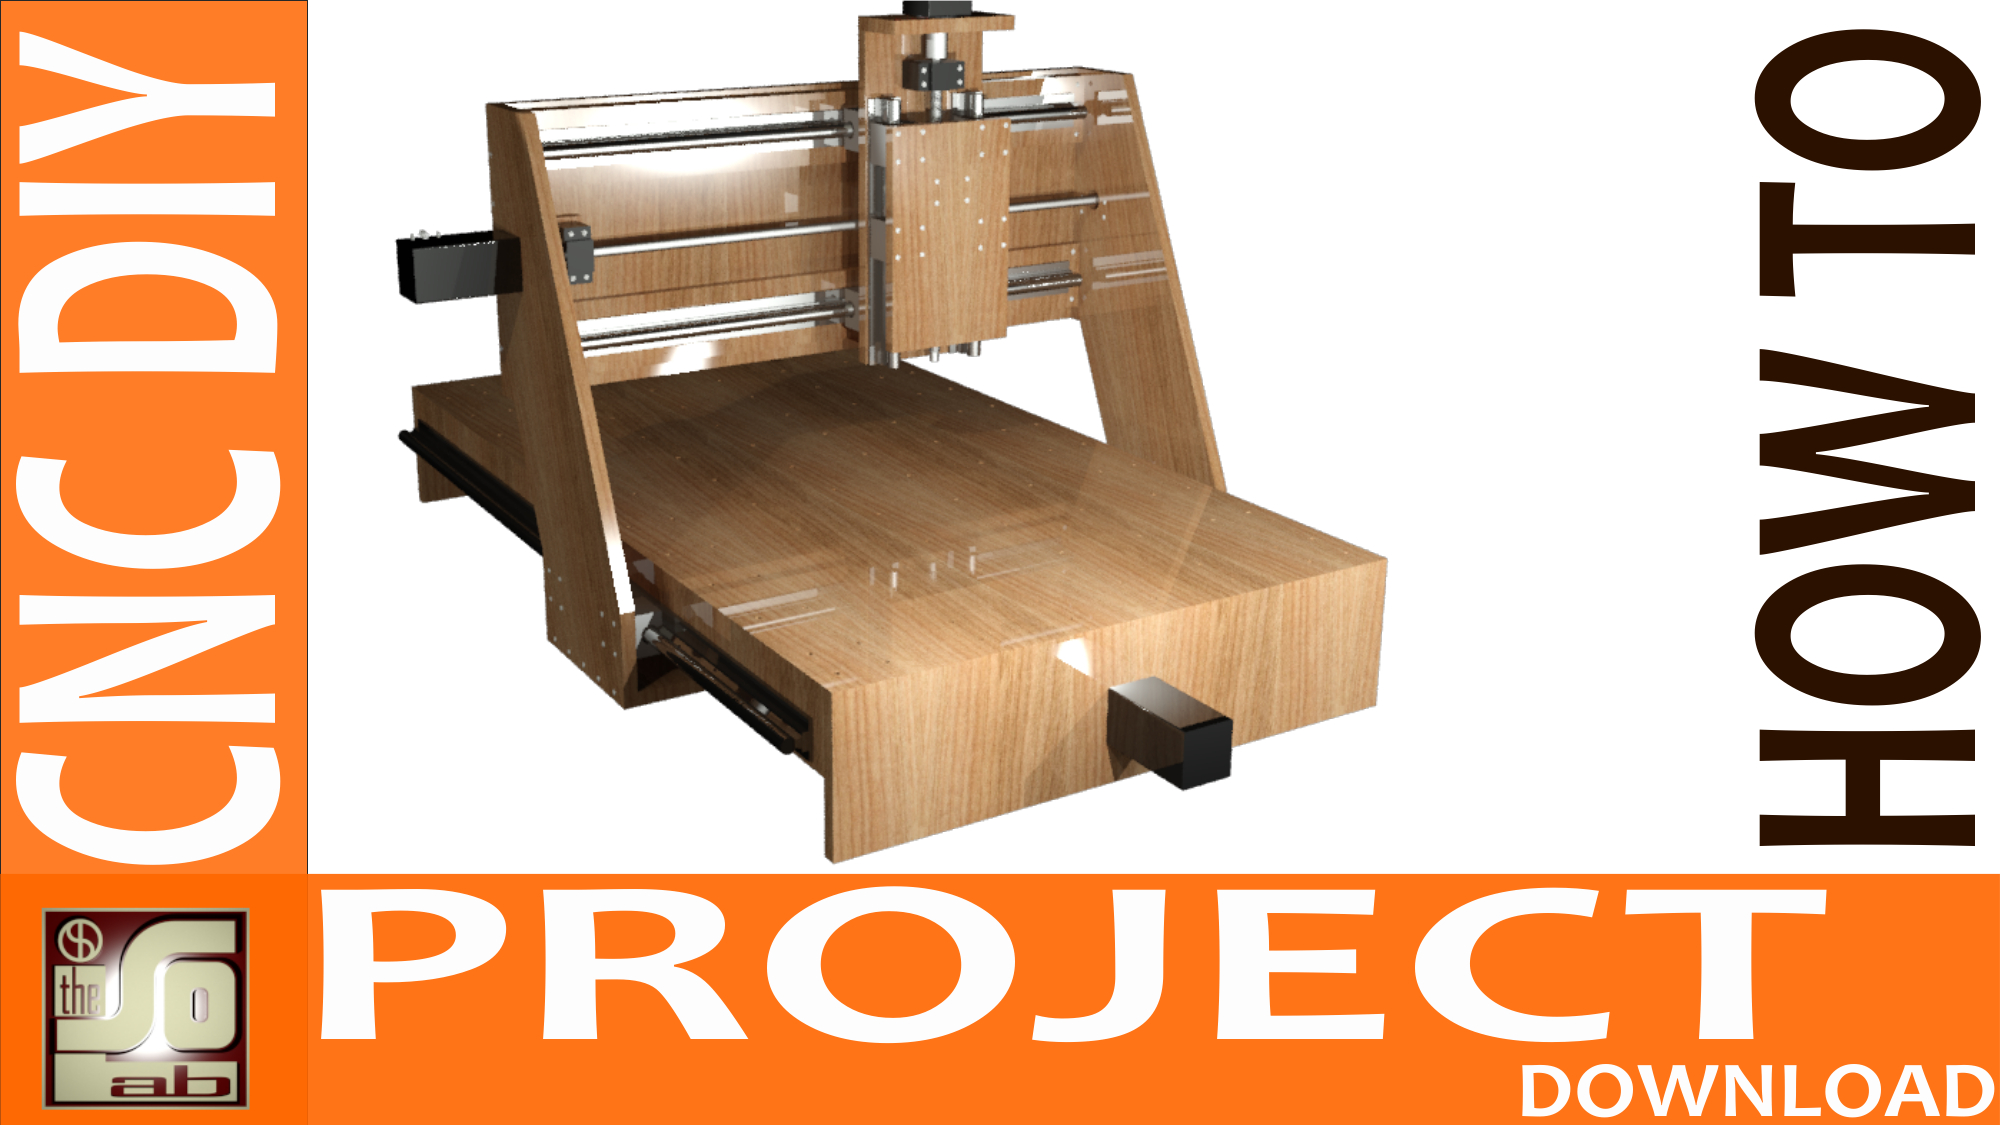 CNC PROJECT - HOW TO MAKE A DIY CNC WOOD PROJECT